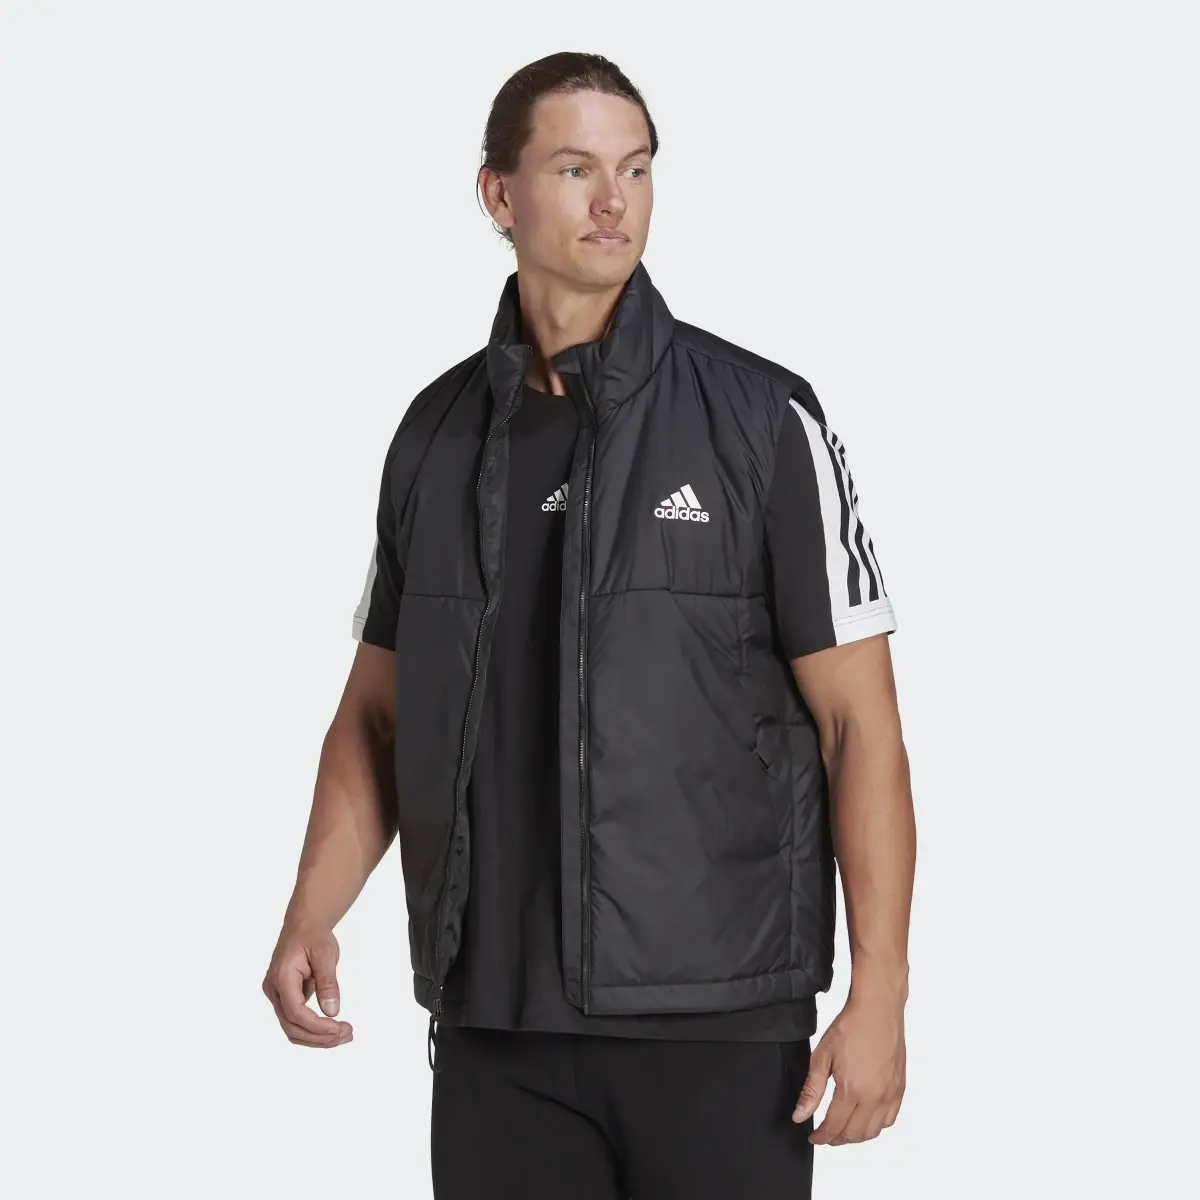 Adidas 3-Stripes Insulated Vest. 2